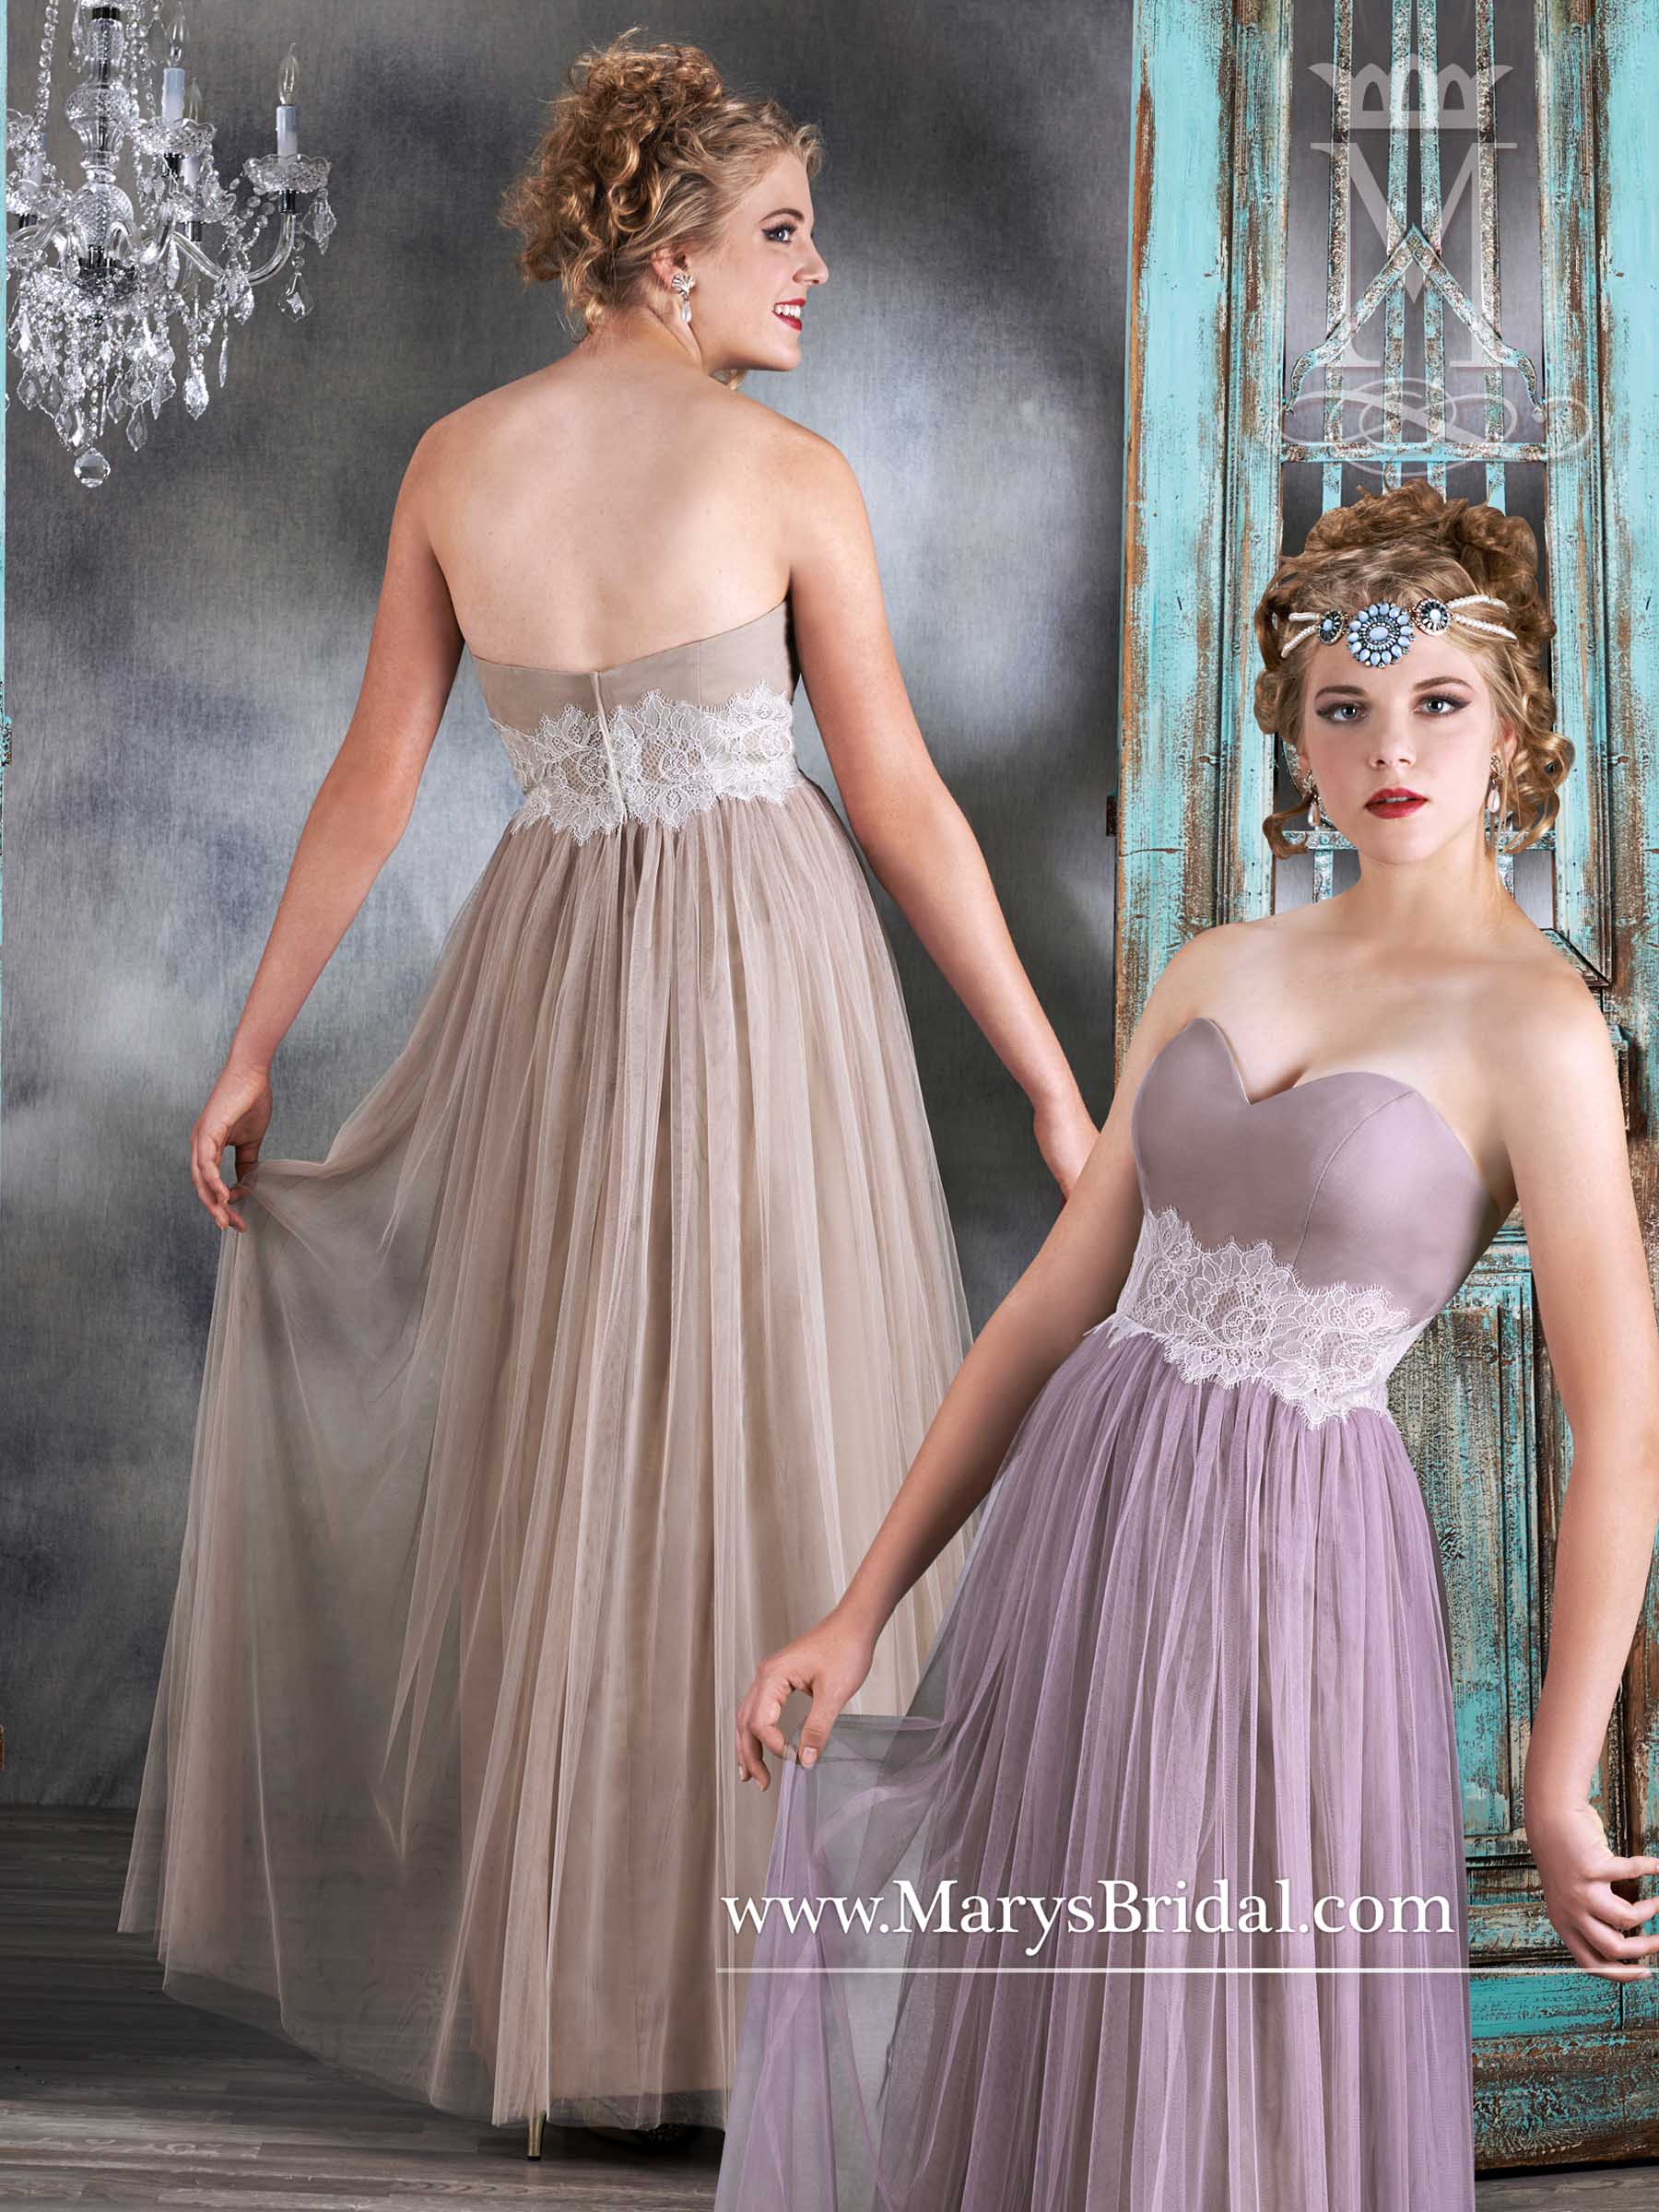 A-line netting and lace bridesmaid gown with a strapless sweetheart neckline, gathered skirt, lace waistline, and back zipper.

Color: Shown in Lavender and Mocha. Available in 49 colors.
Sizes: 2-30
Fabric: Netting, Lace